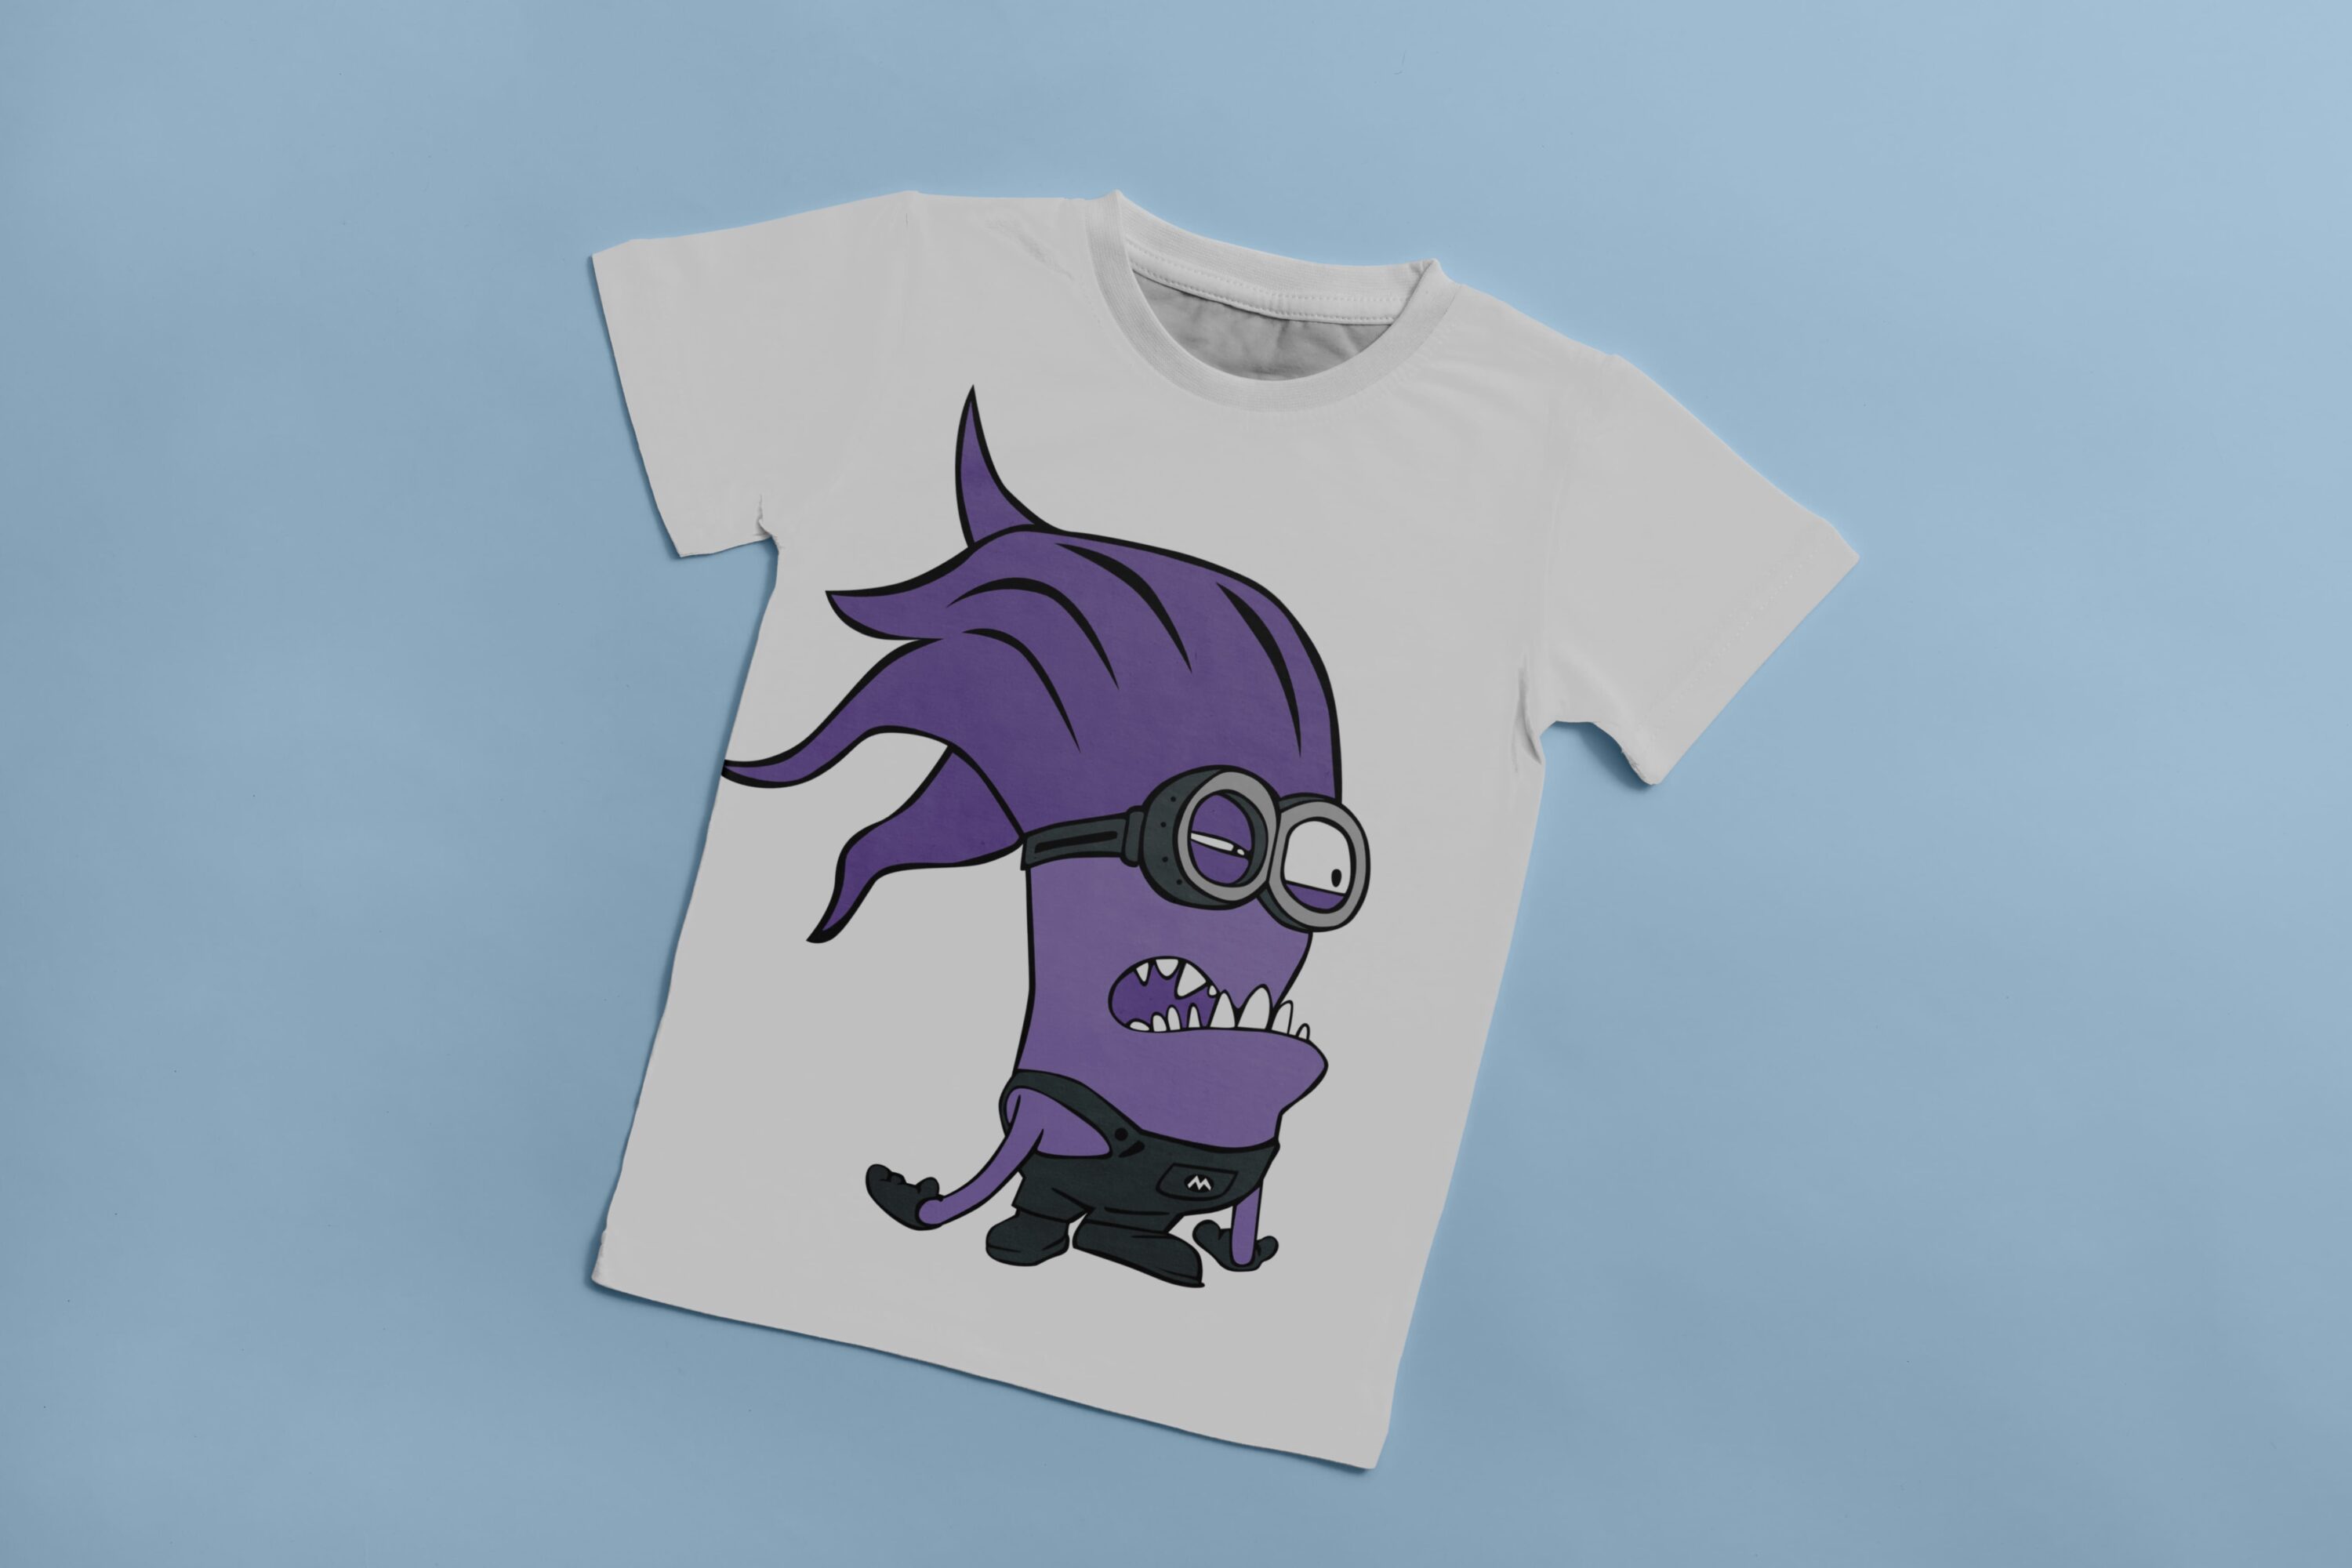 White T-shirt with an image of a angry character - Evil Minion.